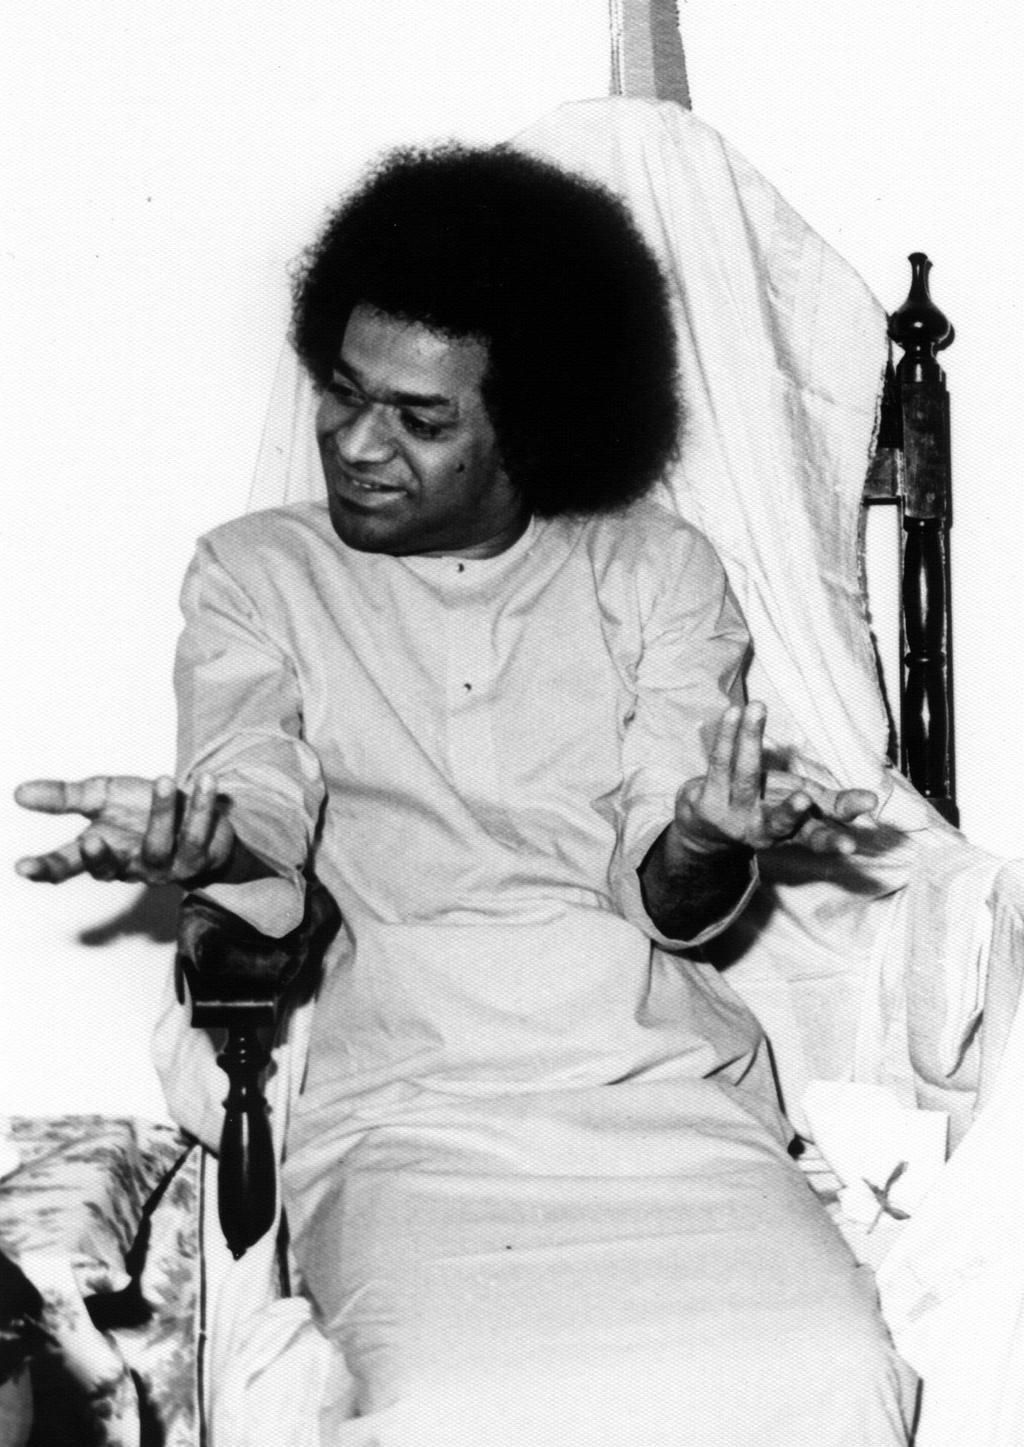 Everything is within you. All that you need is Self-confidence. Self-confidence is most important for spiritual development. Where there is Self-confidence, there is truth.